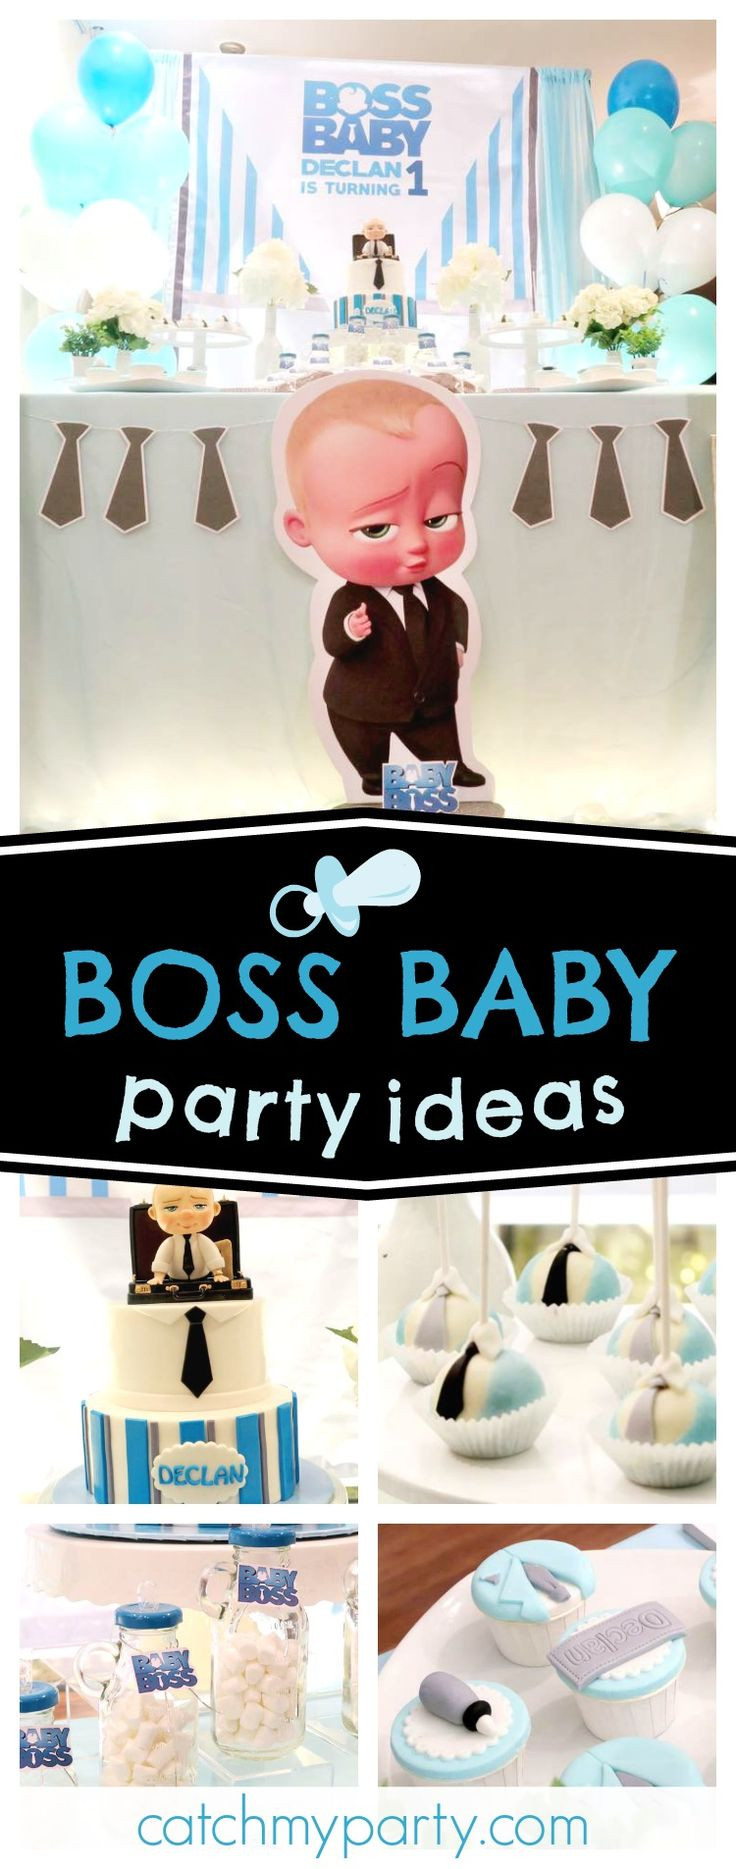 Boss Baby Party Ideas
 1843 best Boy Birthday Party Ideas & Themes images on